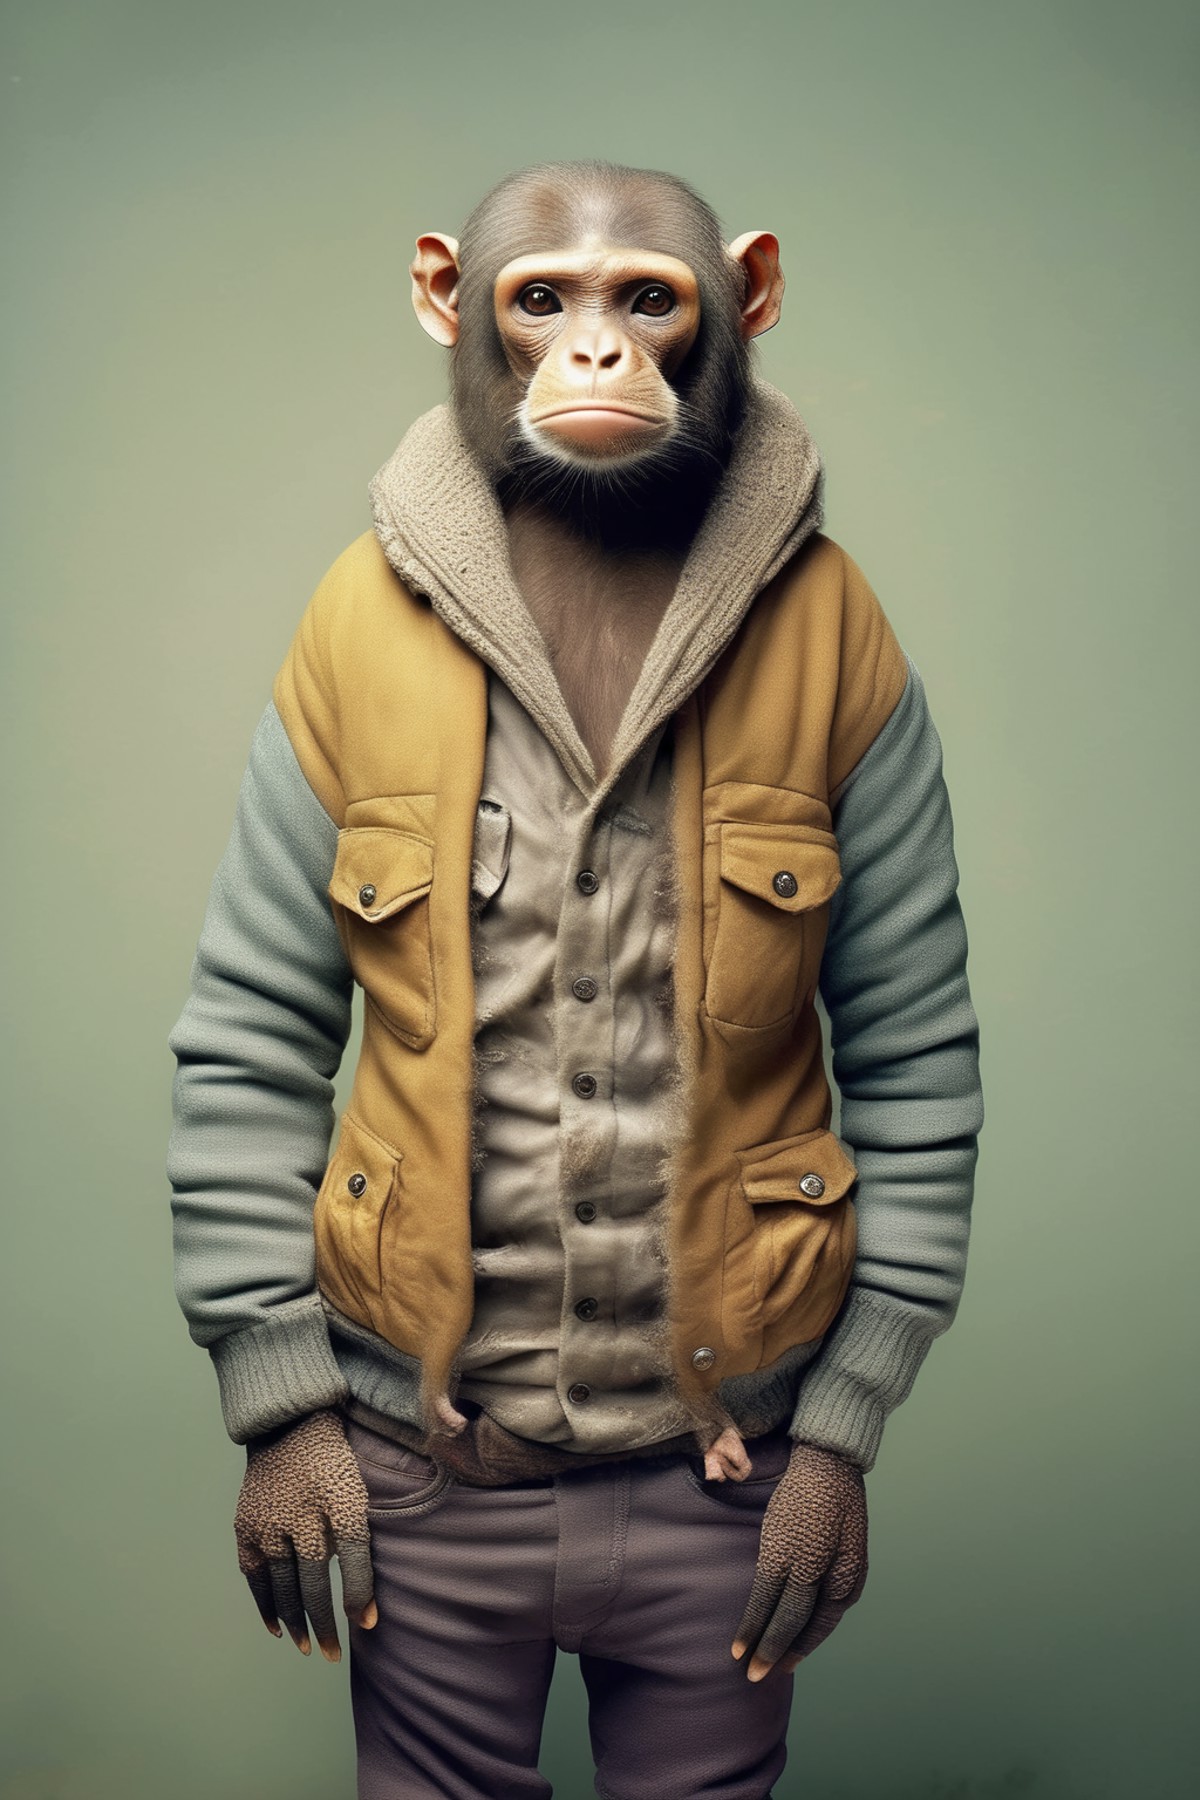 <lora:Dressed animals:1>Dressed animals - animal looking like human in clothes